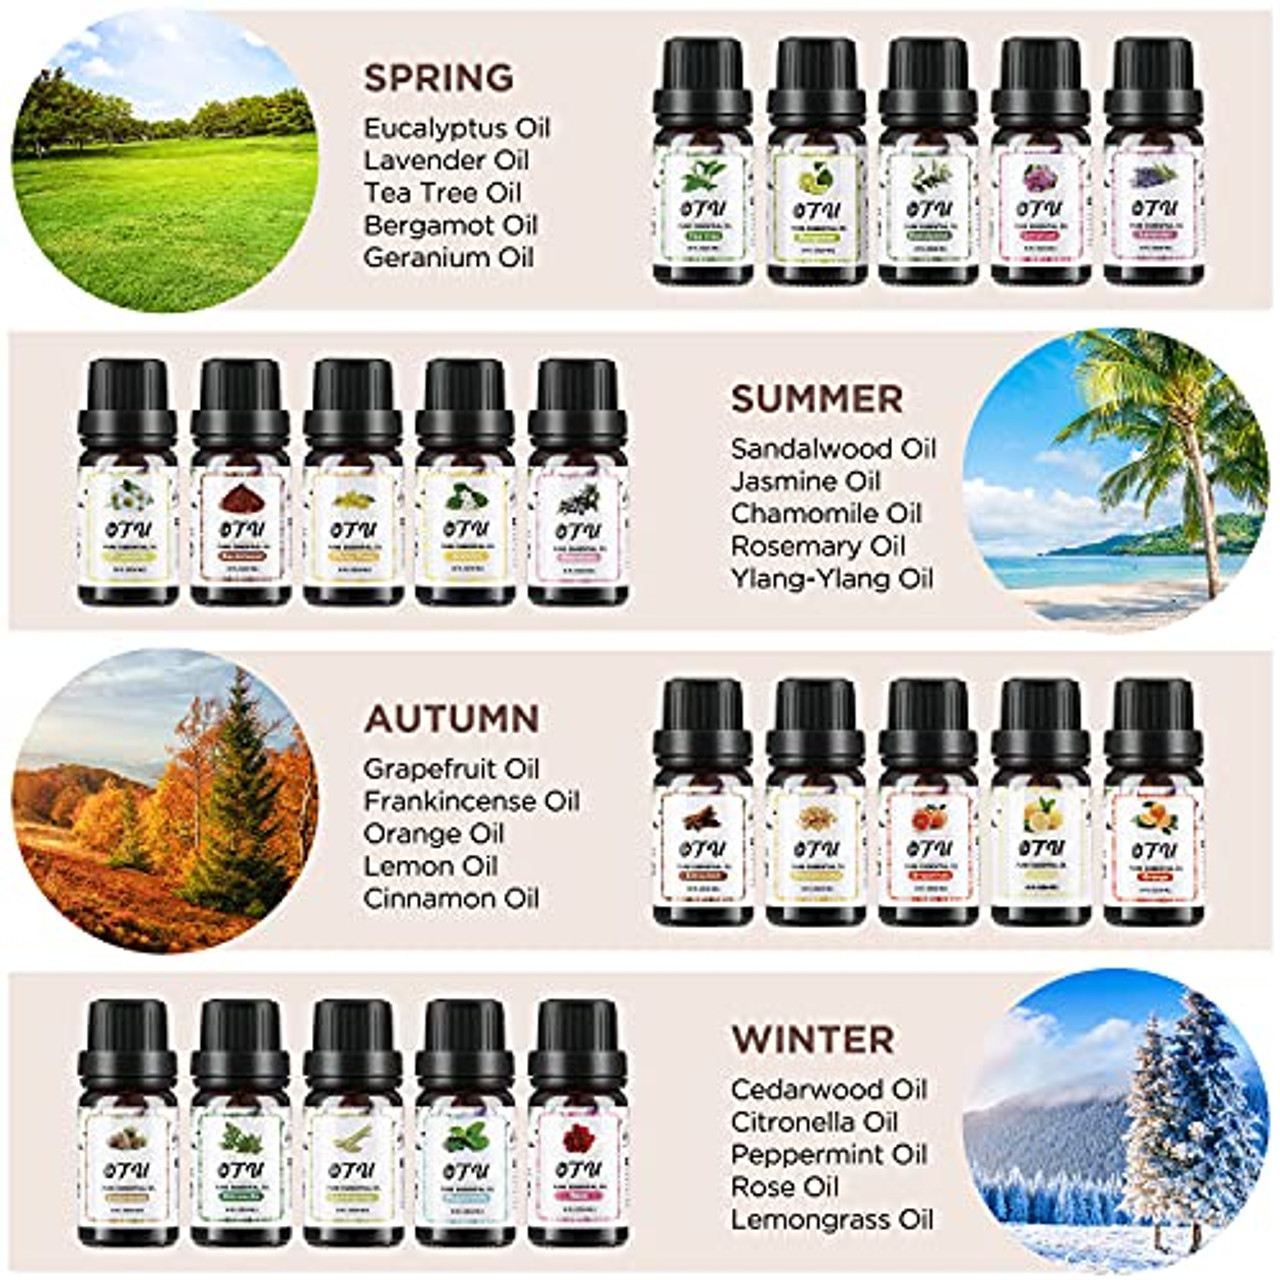 Essential Oils For Life | Aromatherapy Pure Natural Essential Oil Diffuser